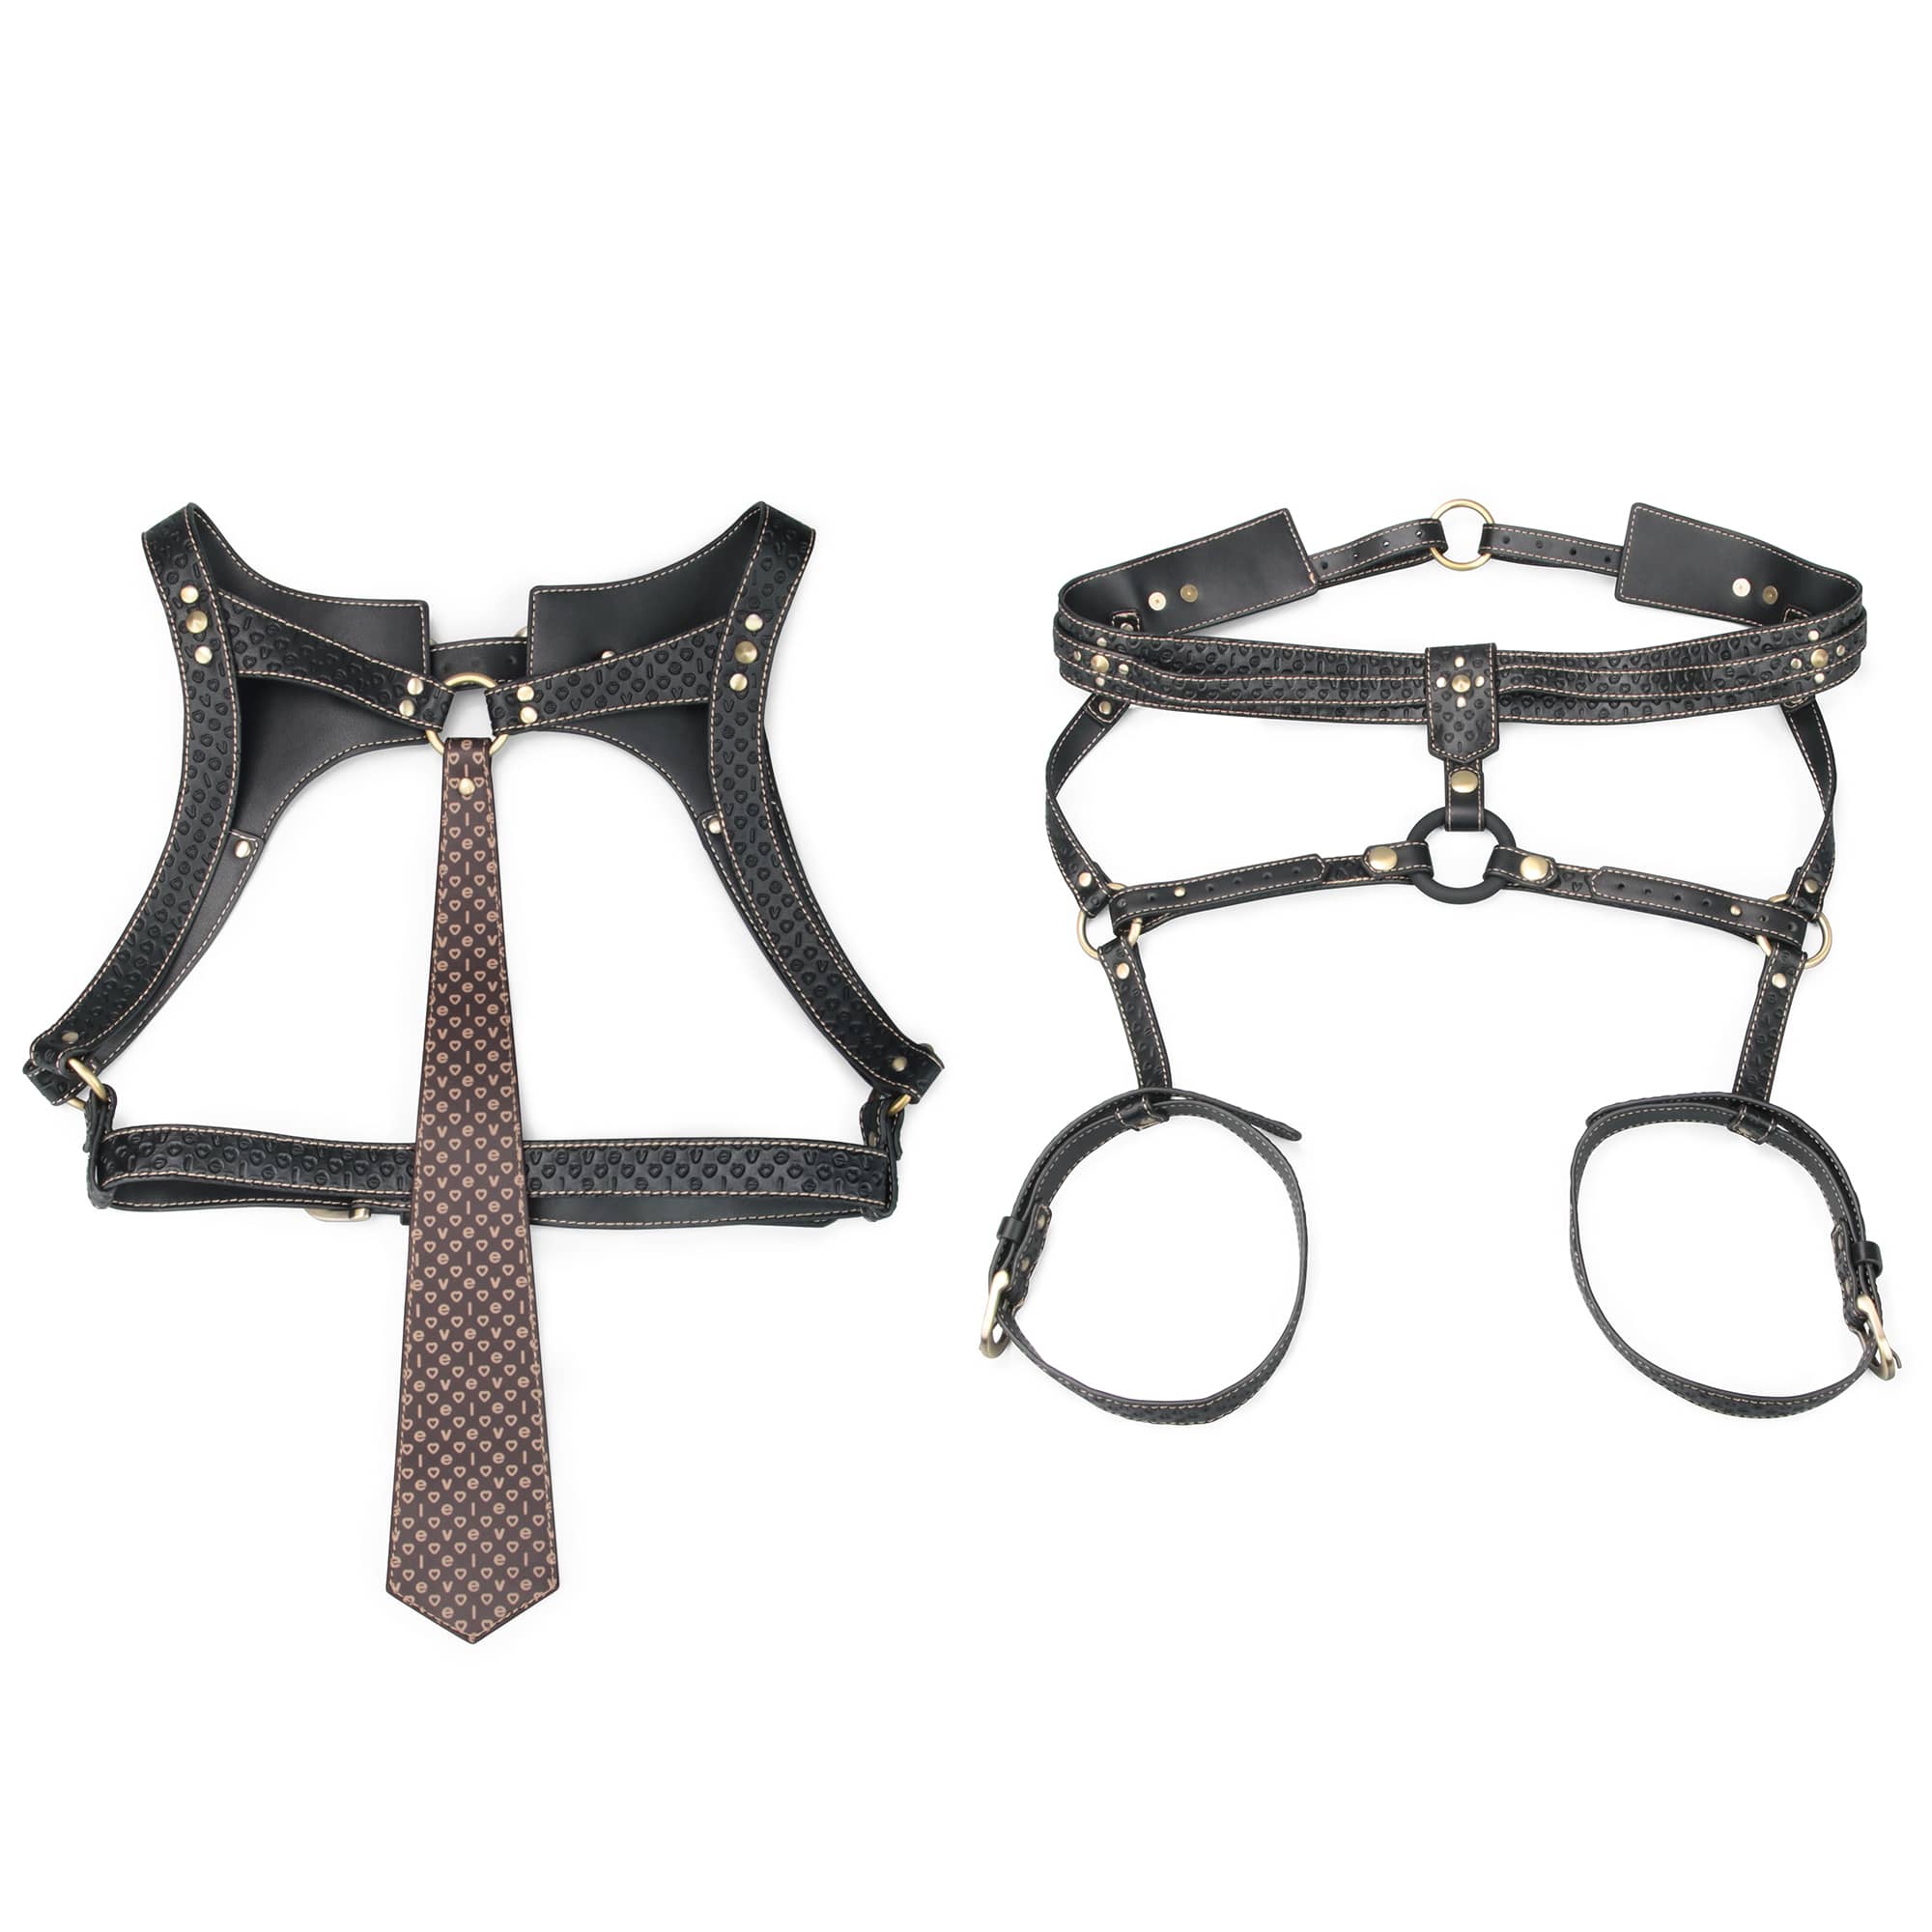 The 2 parts of the rebellion reign full body harness